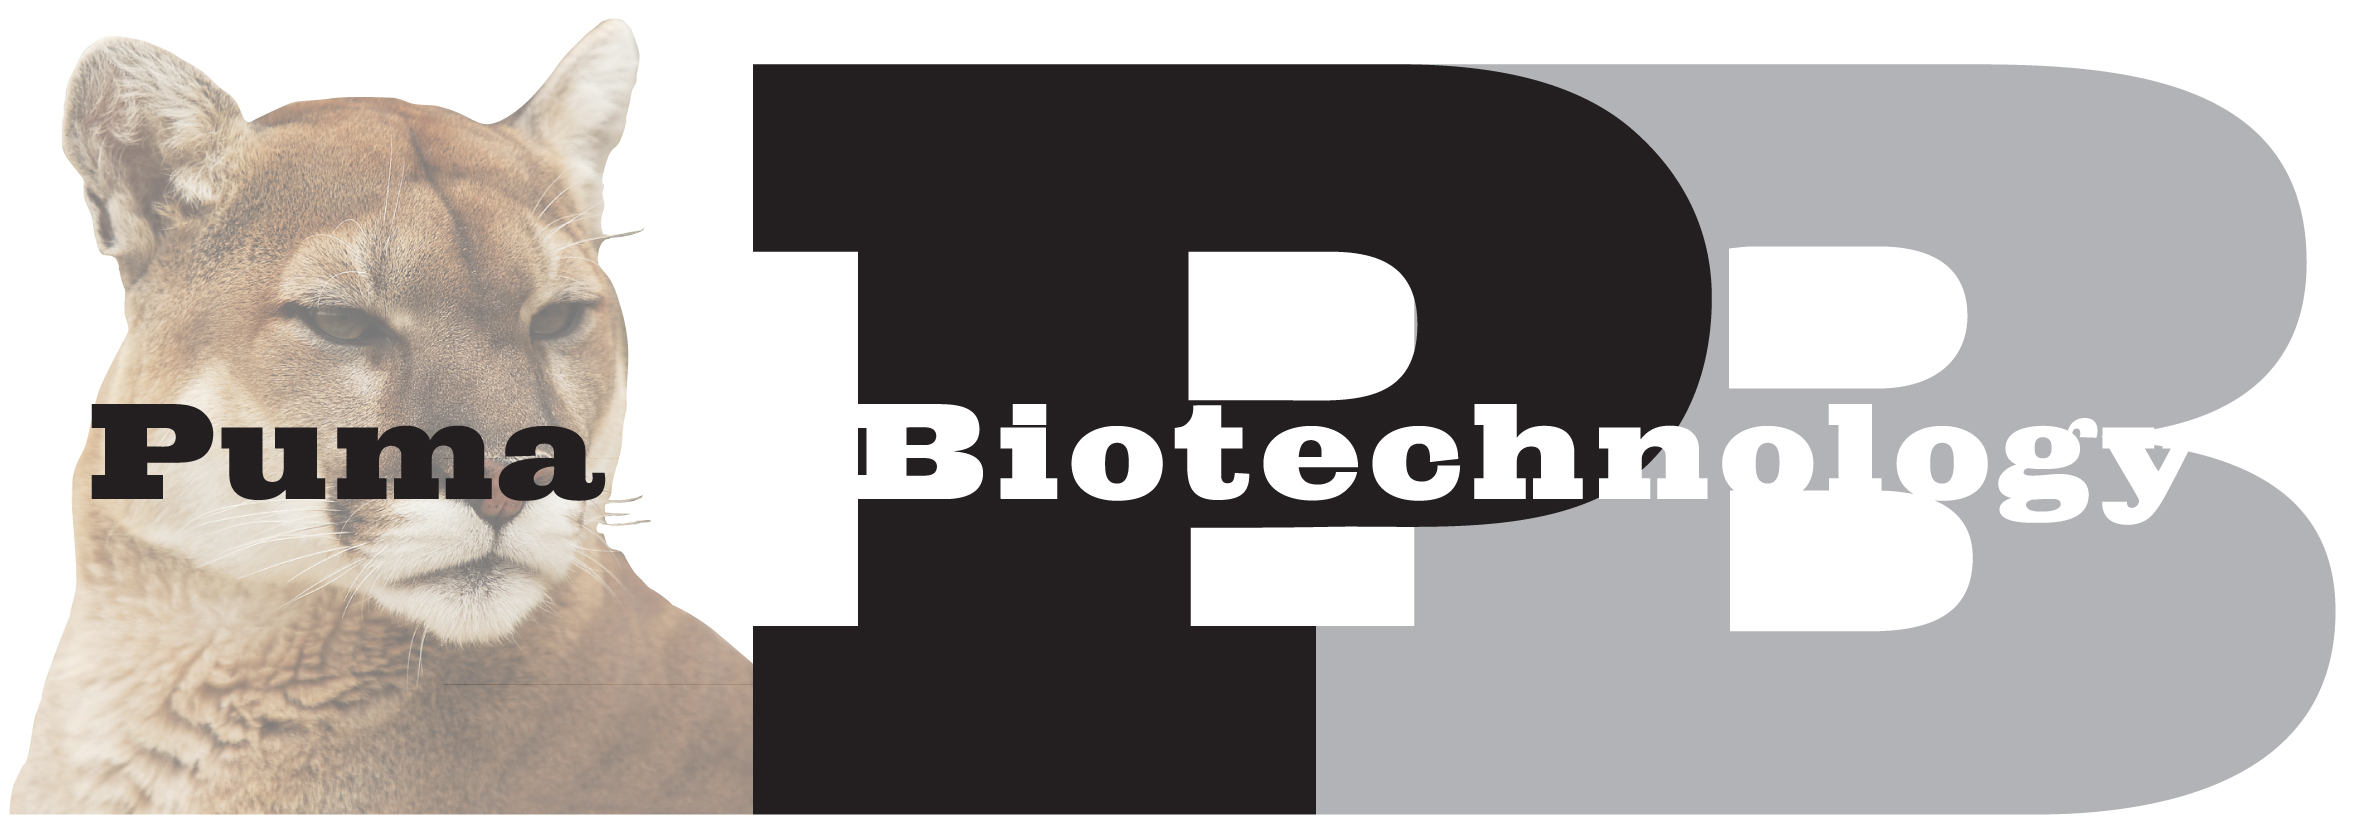 Puma Biotechnology and Pierre Fabre 